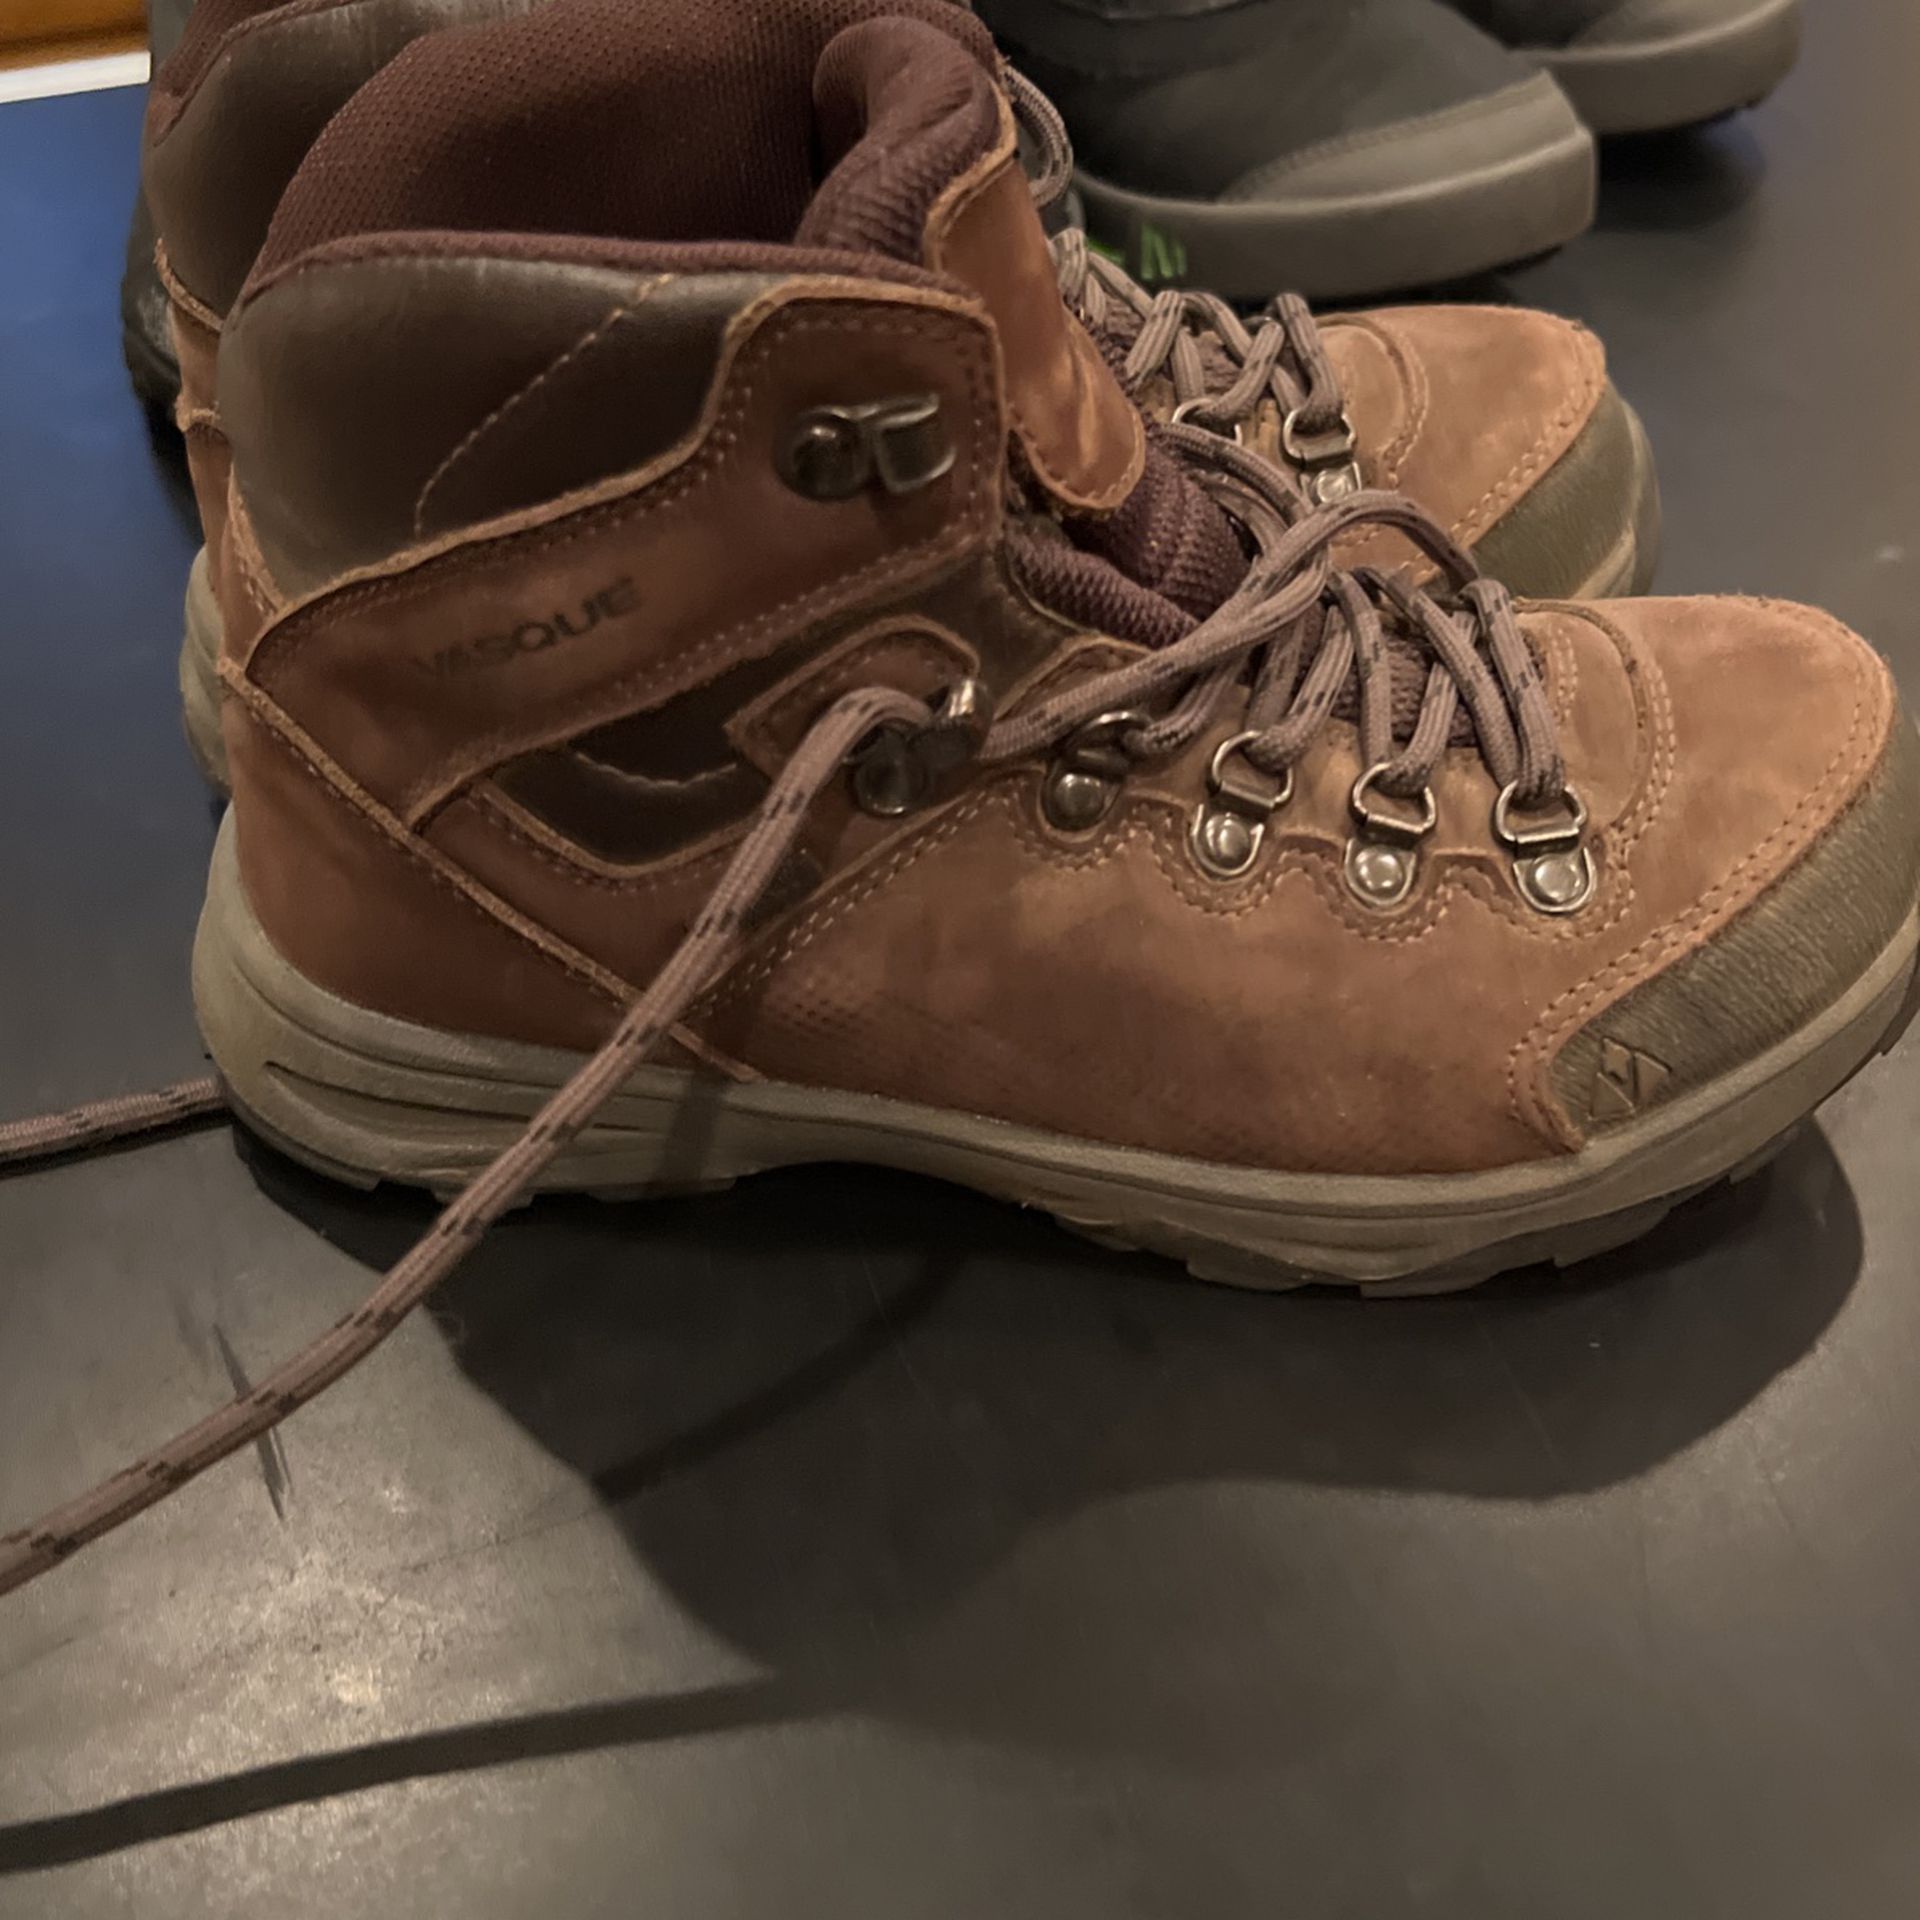 Boots North Face Merrell Basque snow Hiking Sale in La Canada Flt, OfferUp